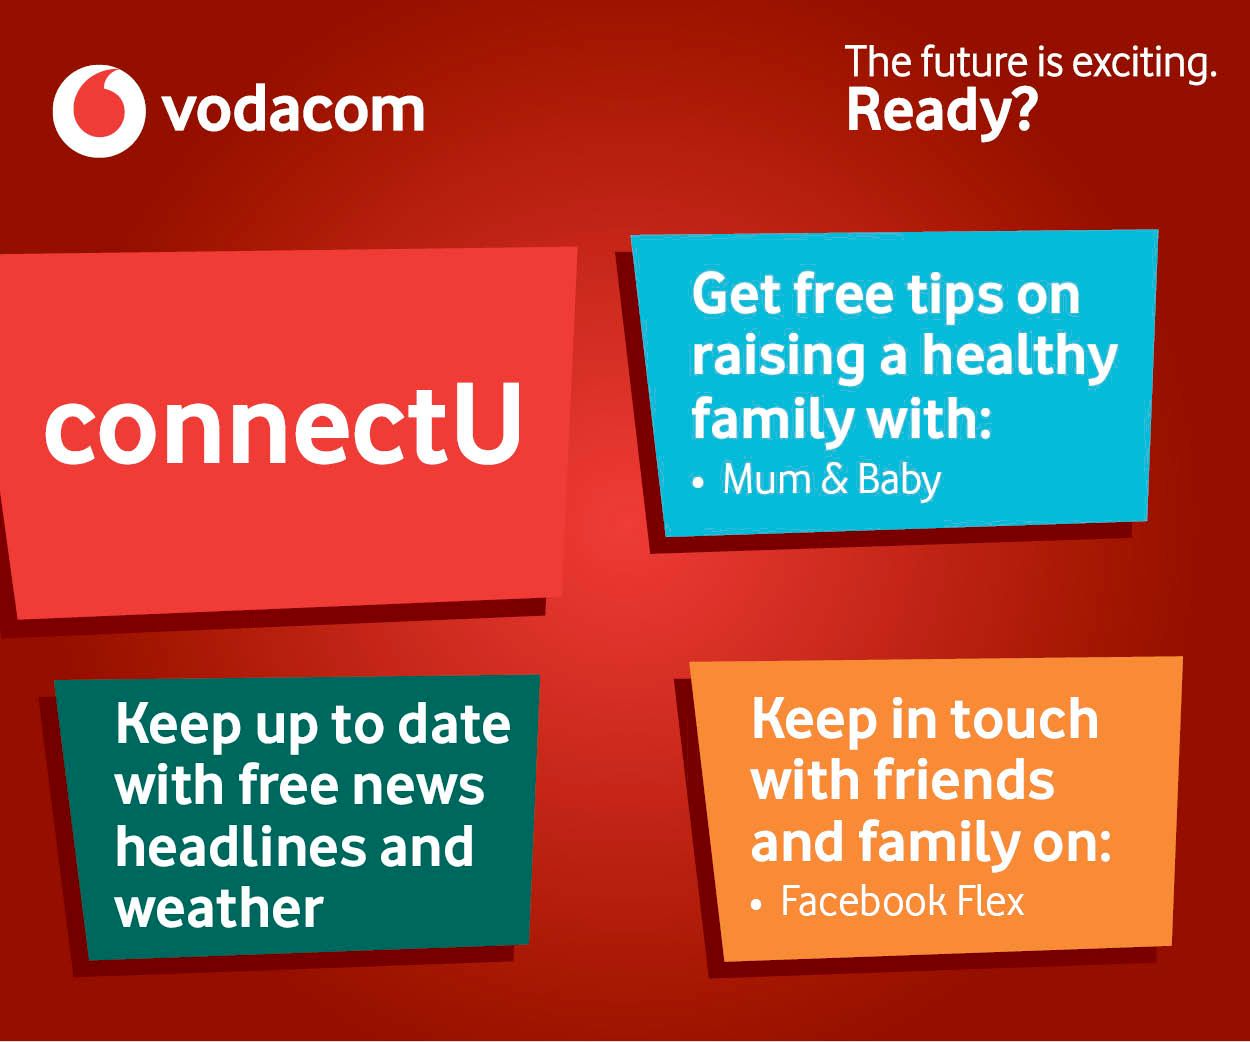 Vodacom Connectu Portal Exceeds 34 Million Unique Users In 2 Years